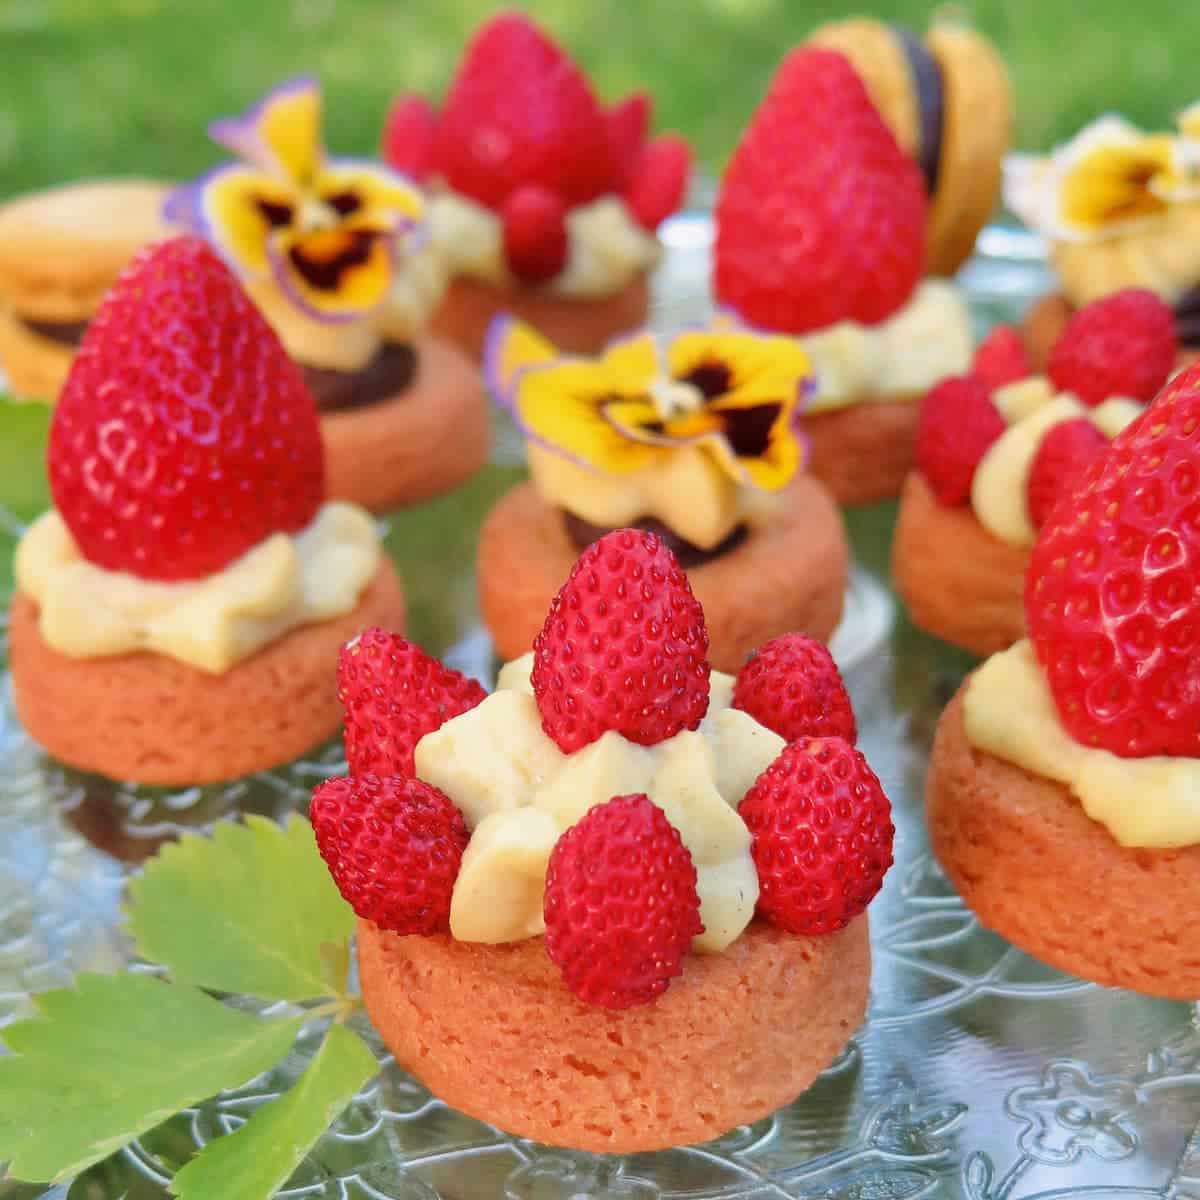 thick salted butter cookies or palets bretons topped with pastry cream and strawberries